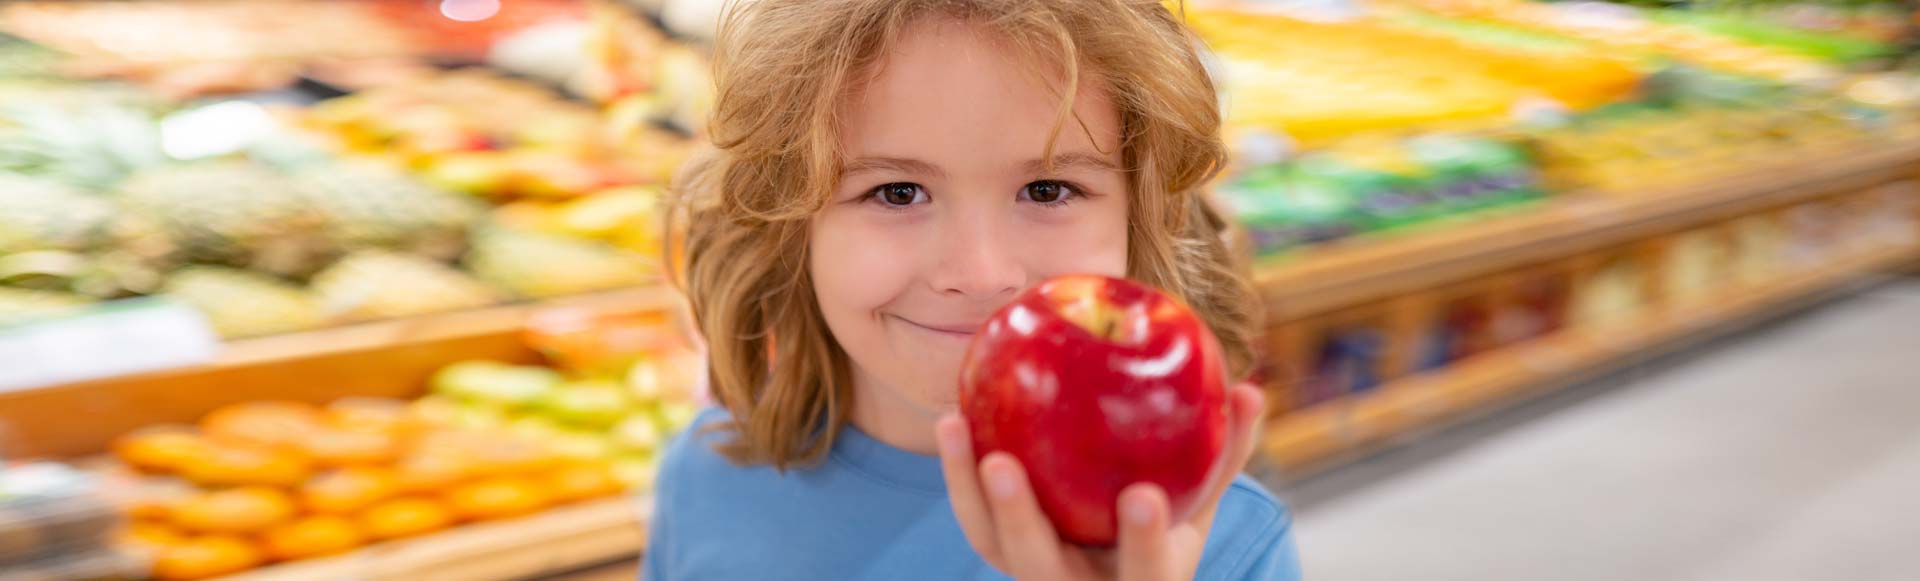 Girl holding an apple in a grocery store.